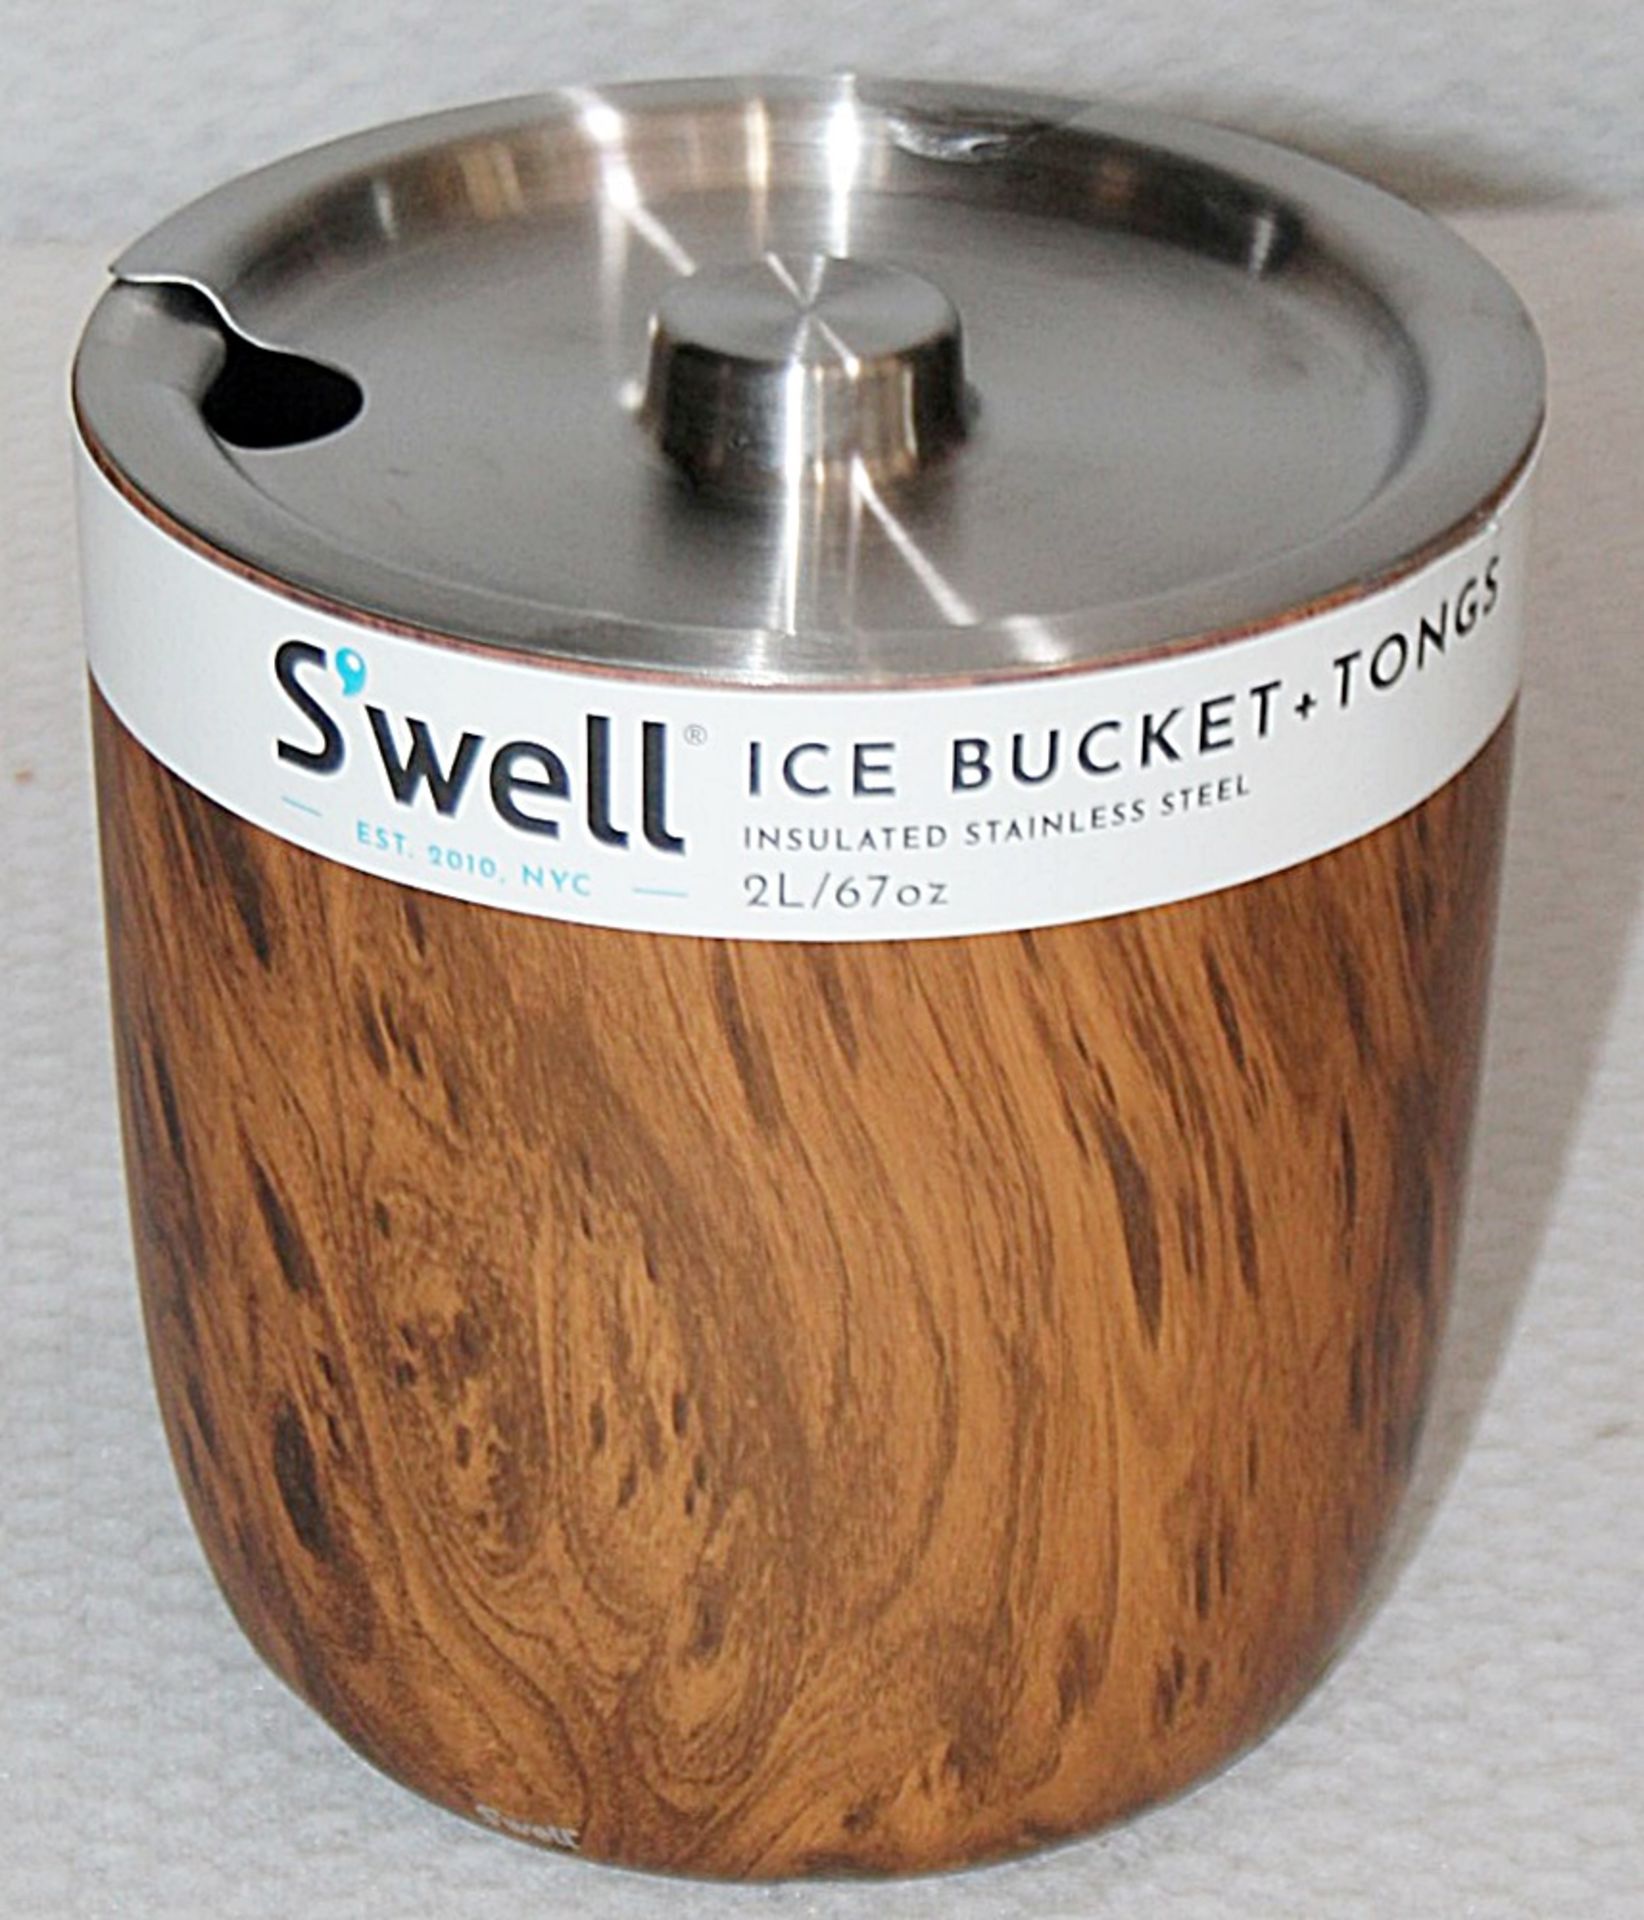 1 x S'WELL Designer Ice Bucket With Teakwood Effect Finish - Includes Tongs - Original Price £50. - Image 2 of 8